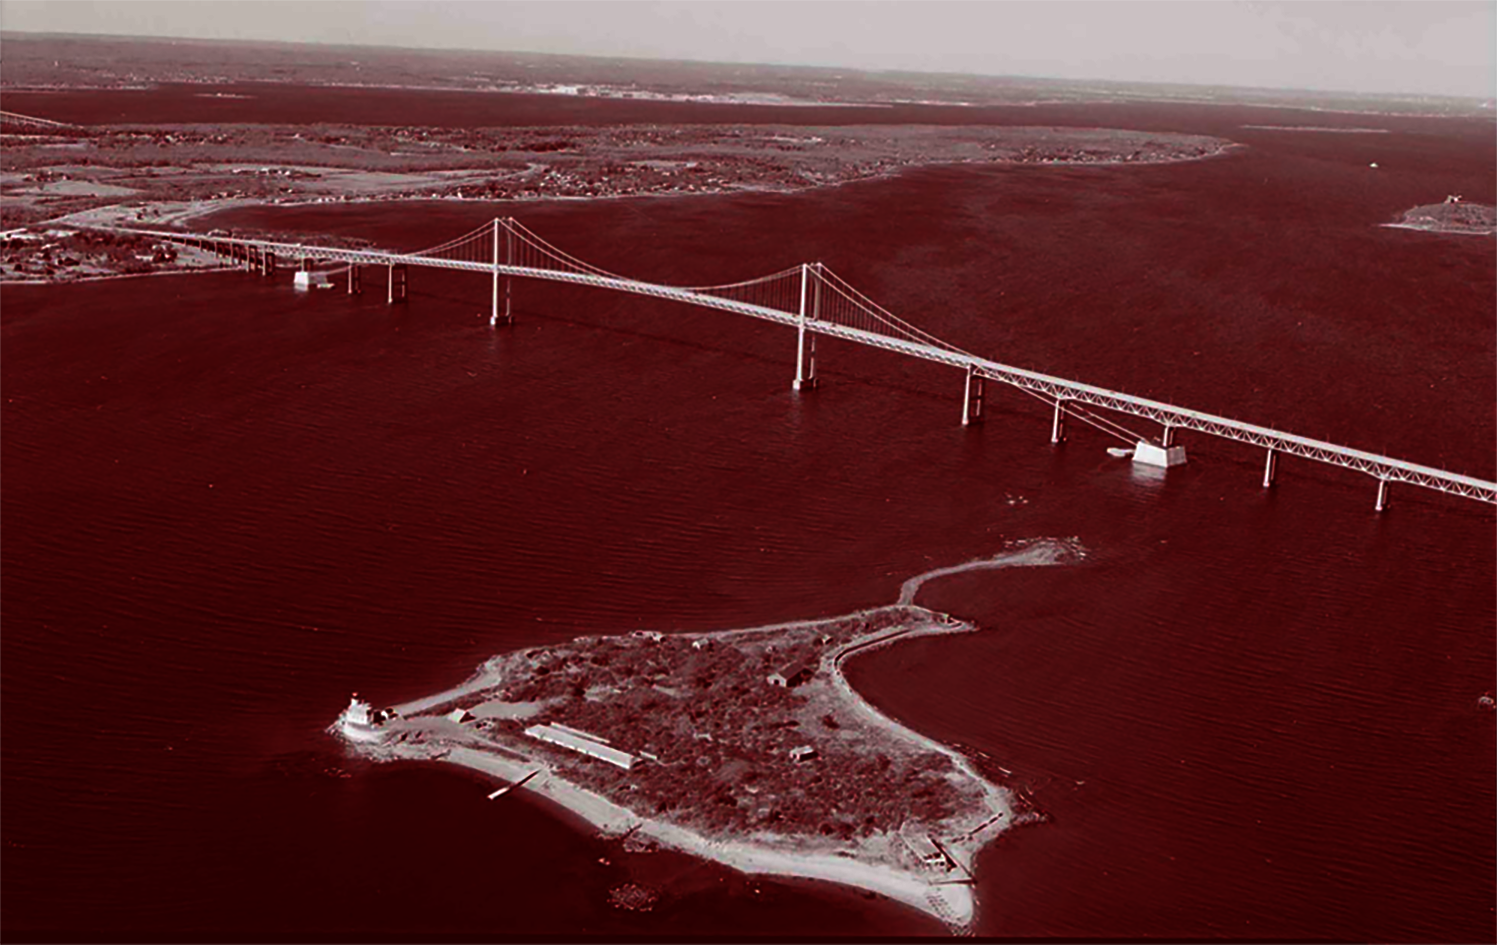 red-tinted aerial view of the Pell Bridge, a suspension bridge spanning a river with an island 